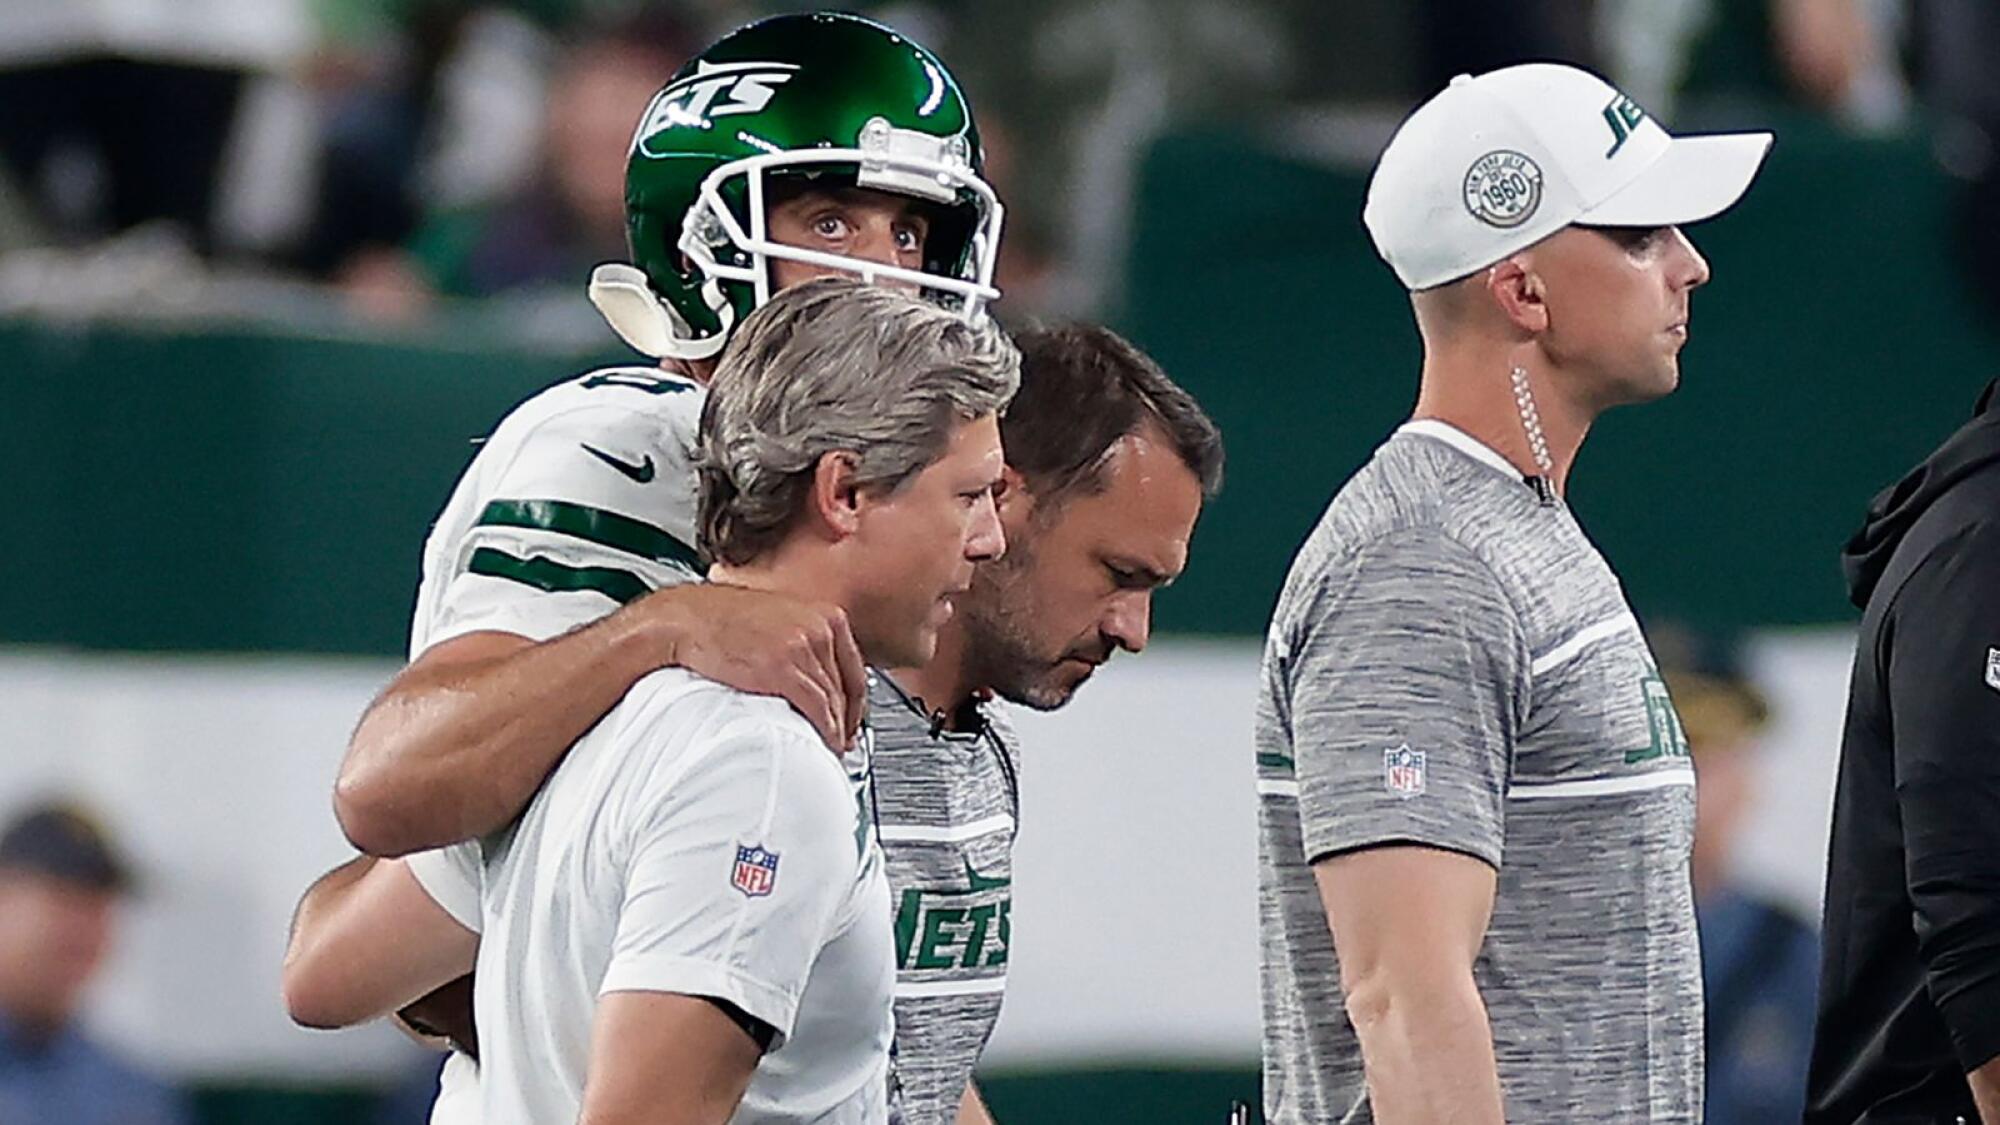 Jets lose Aaron Rodgers to an Achilles tendon injury, then rally to stun  Bills 22-16 in overtime